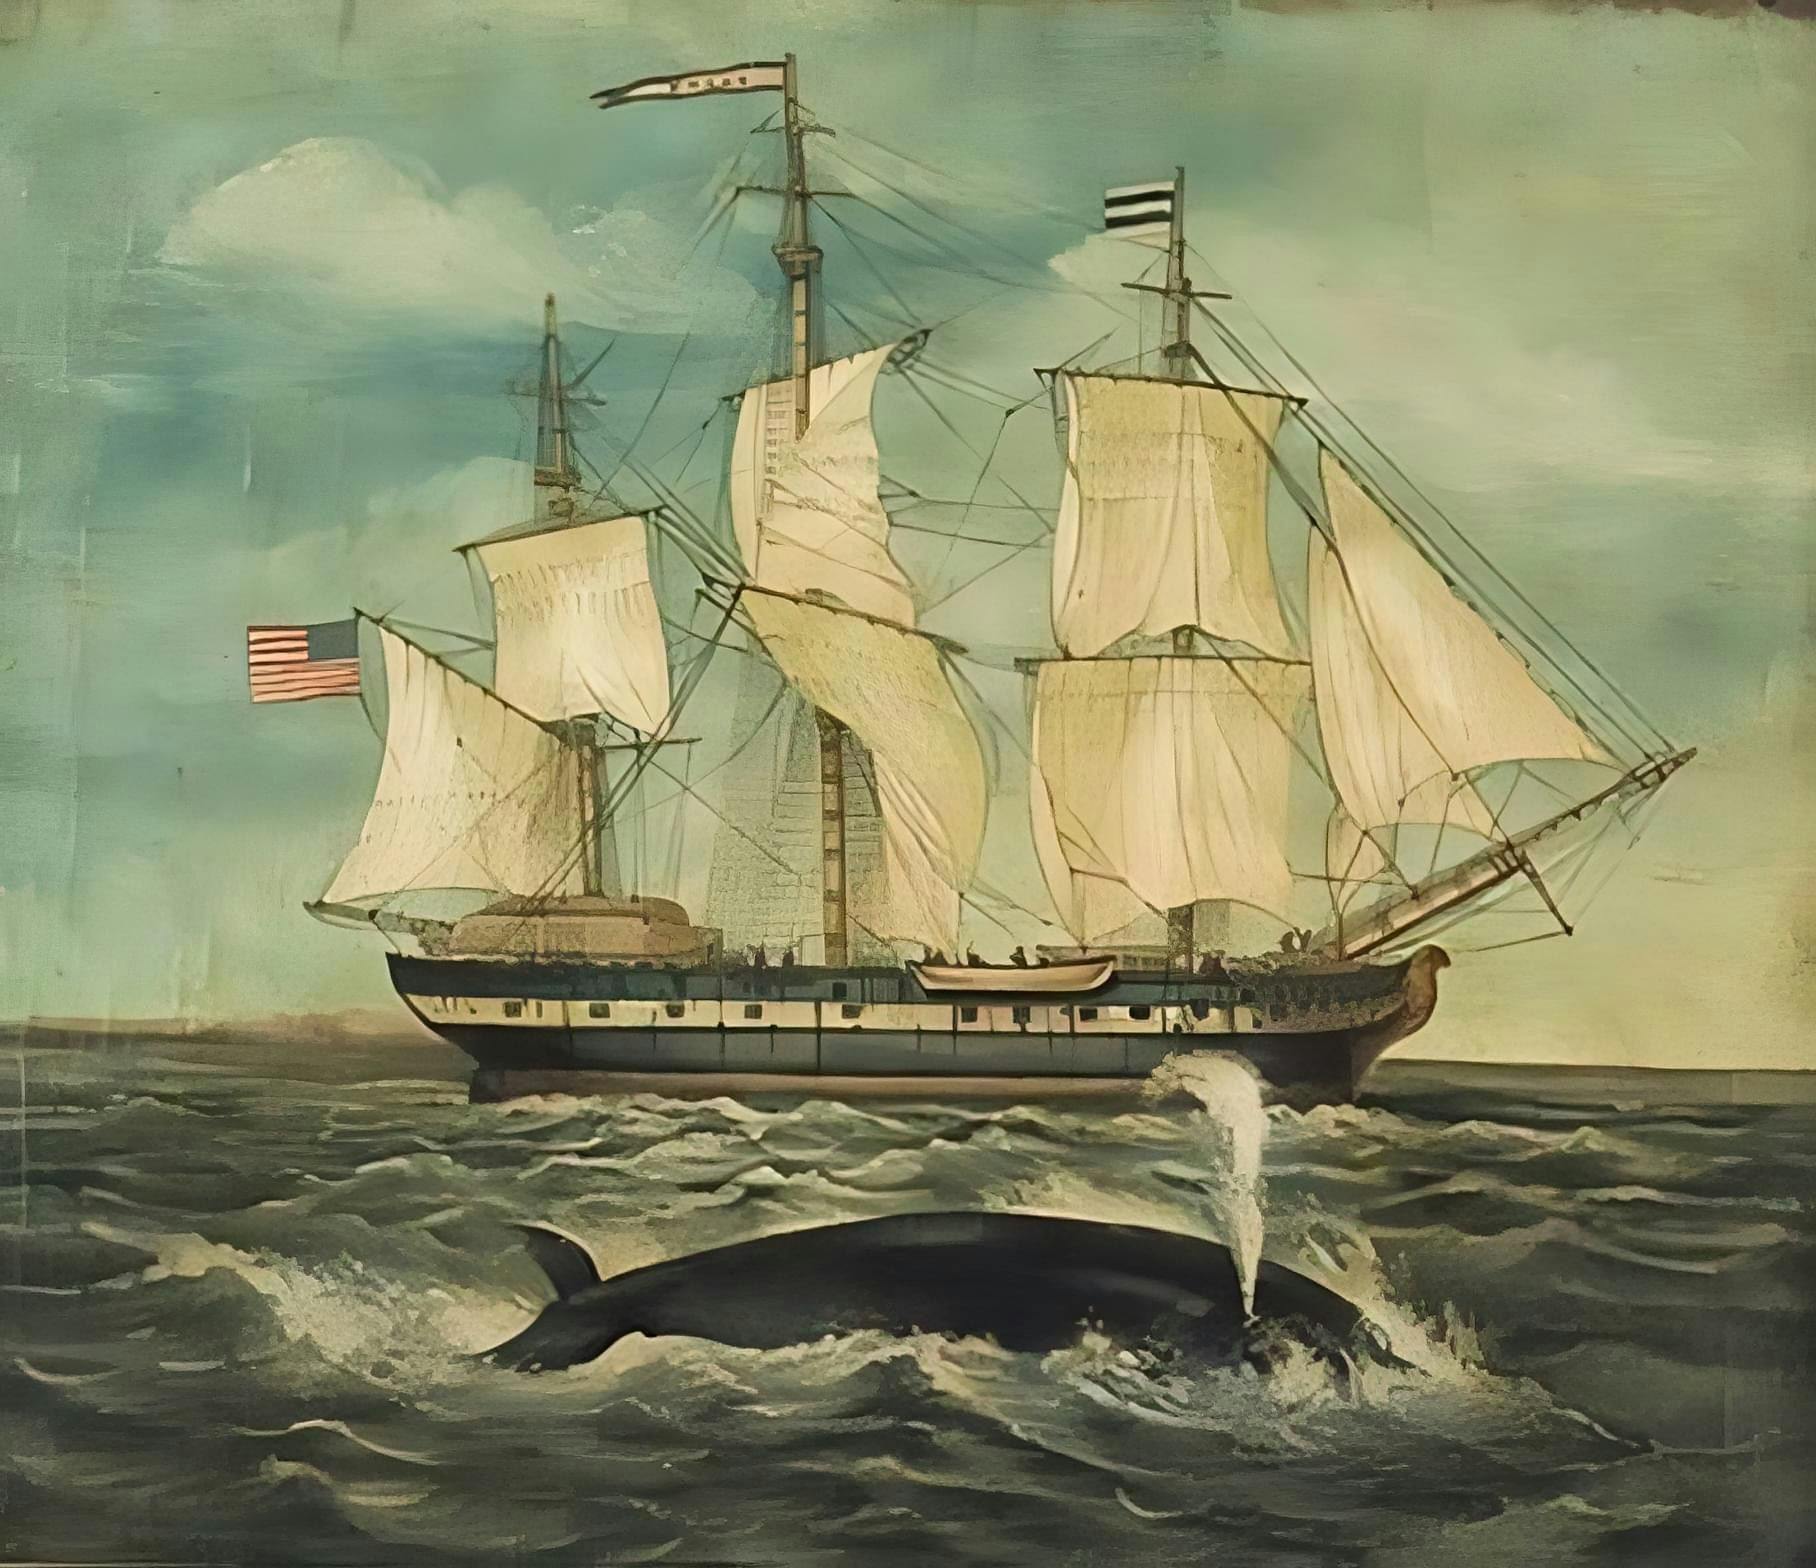 The Cervantes or similar Barque depicted in Colour Drawing